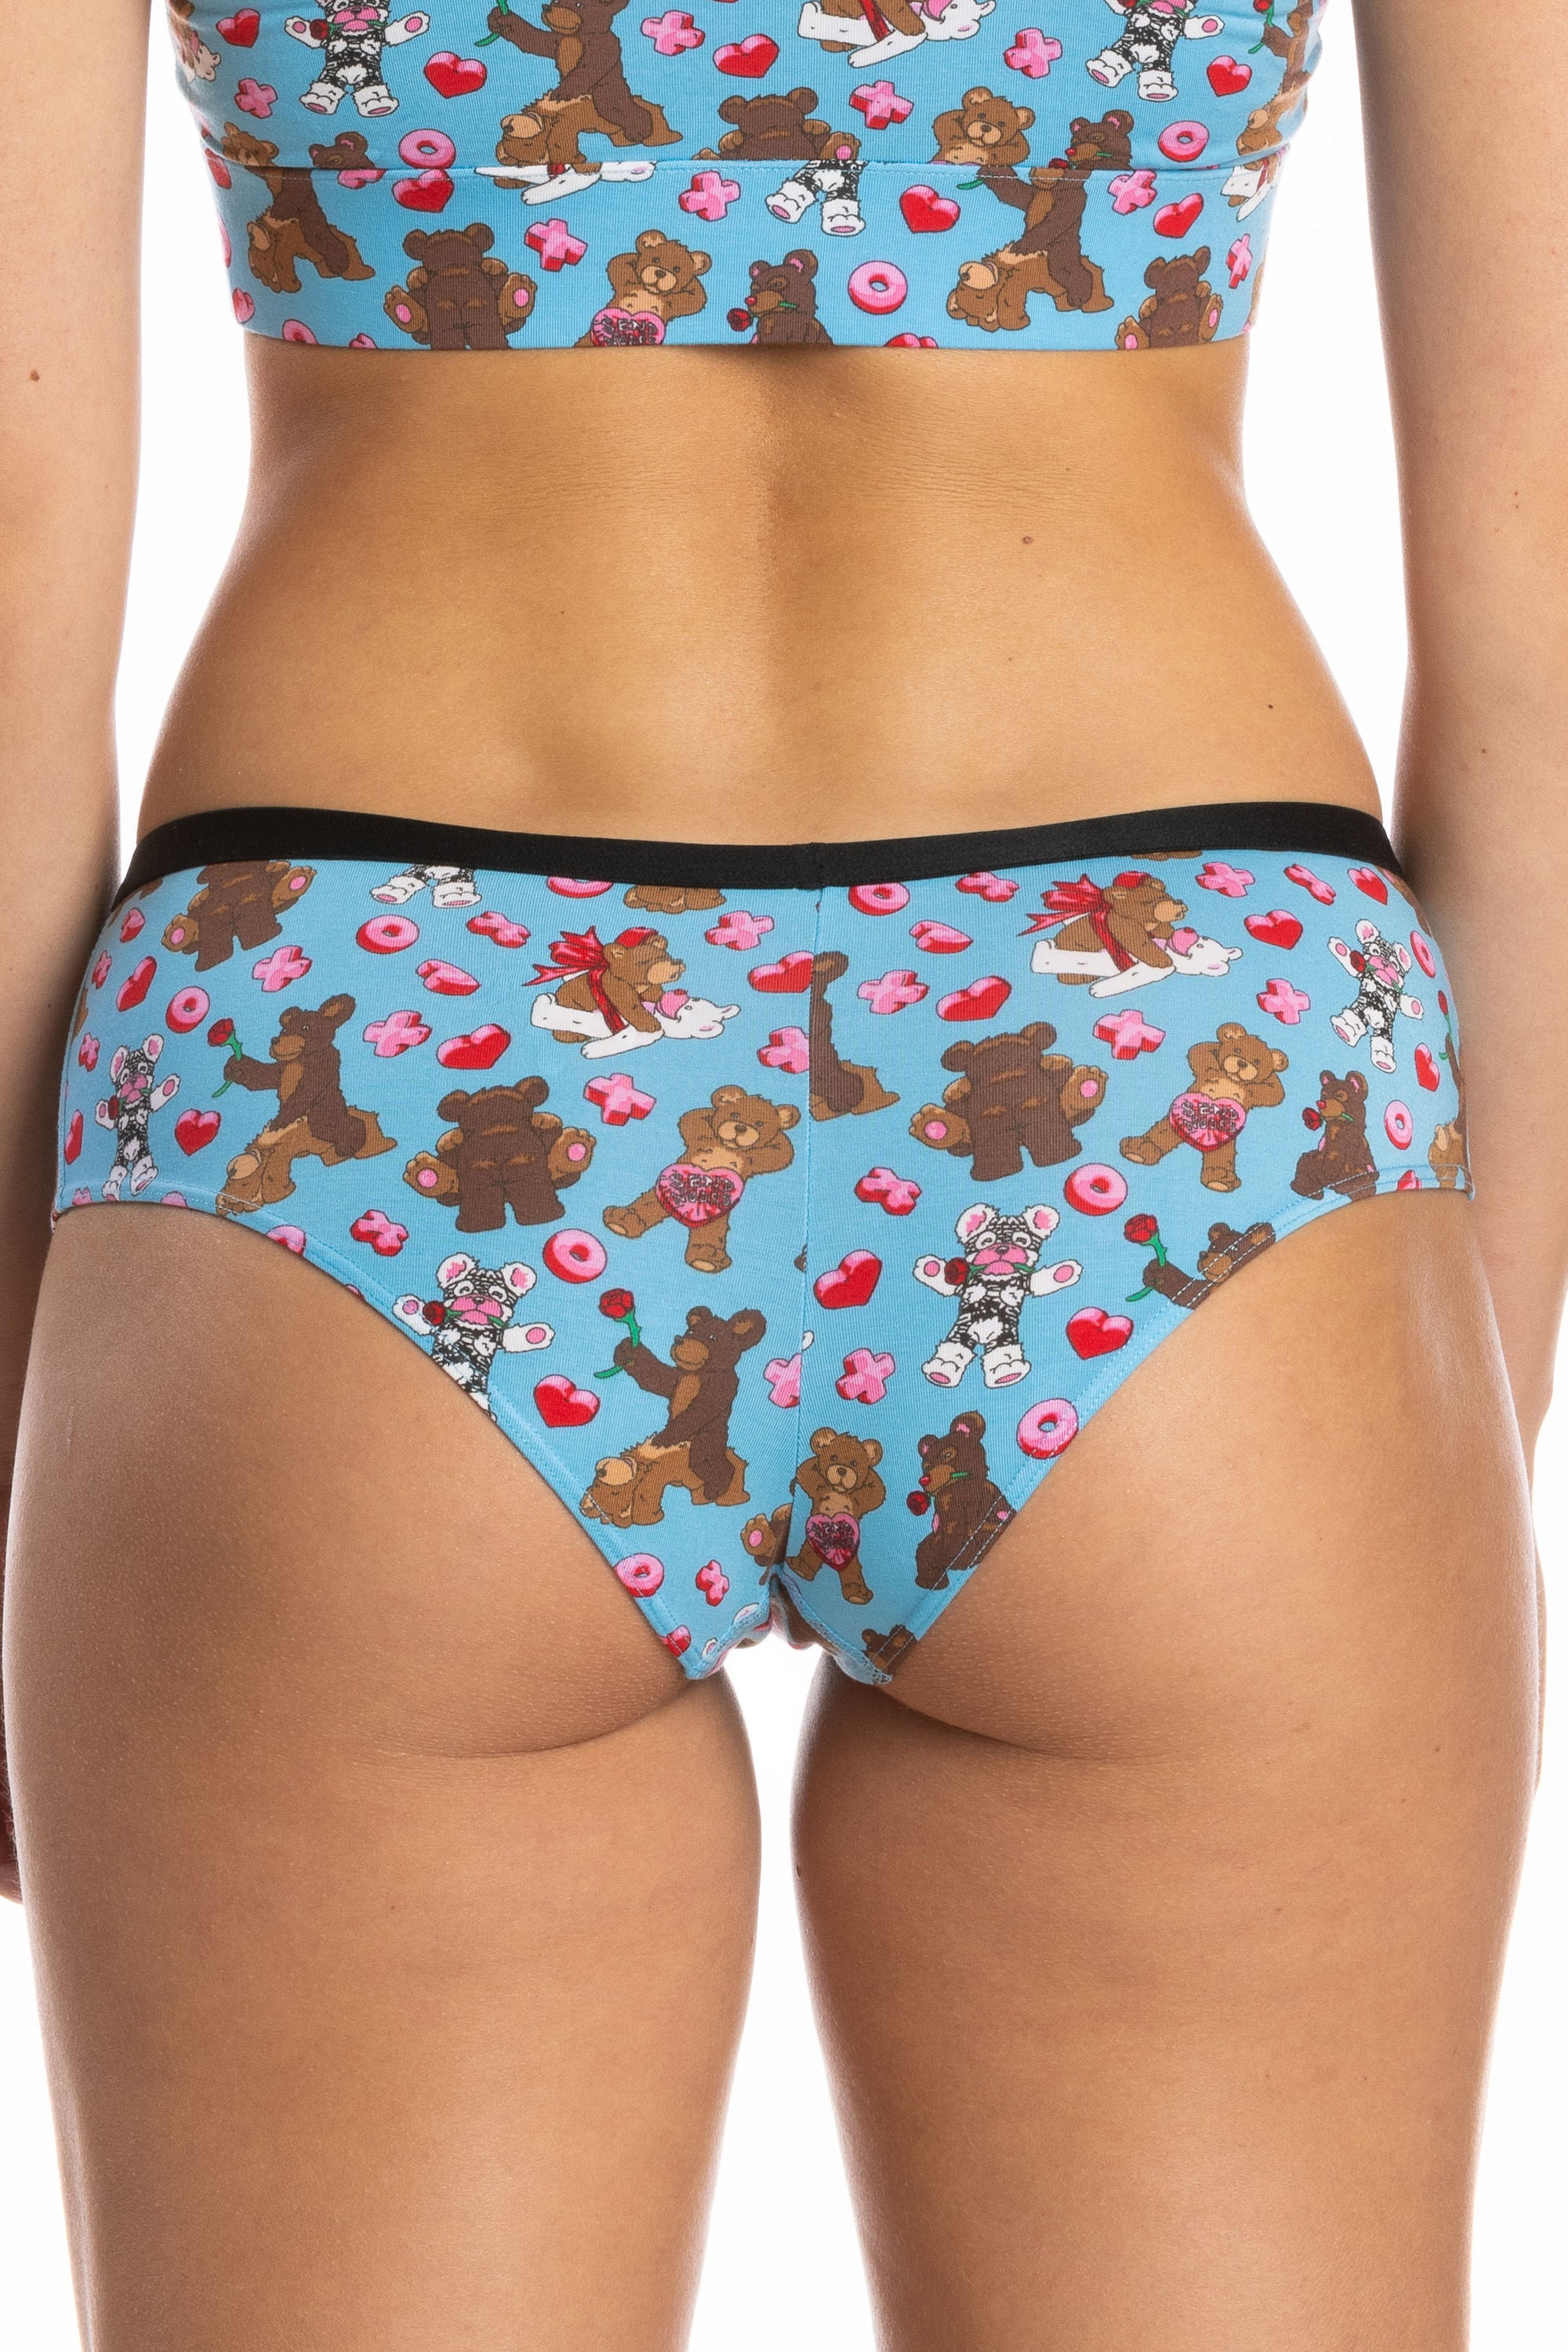 Shinesty - Match your boo bear in couples underwear that